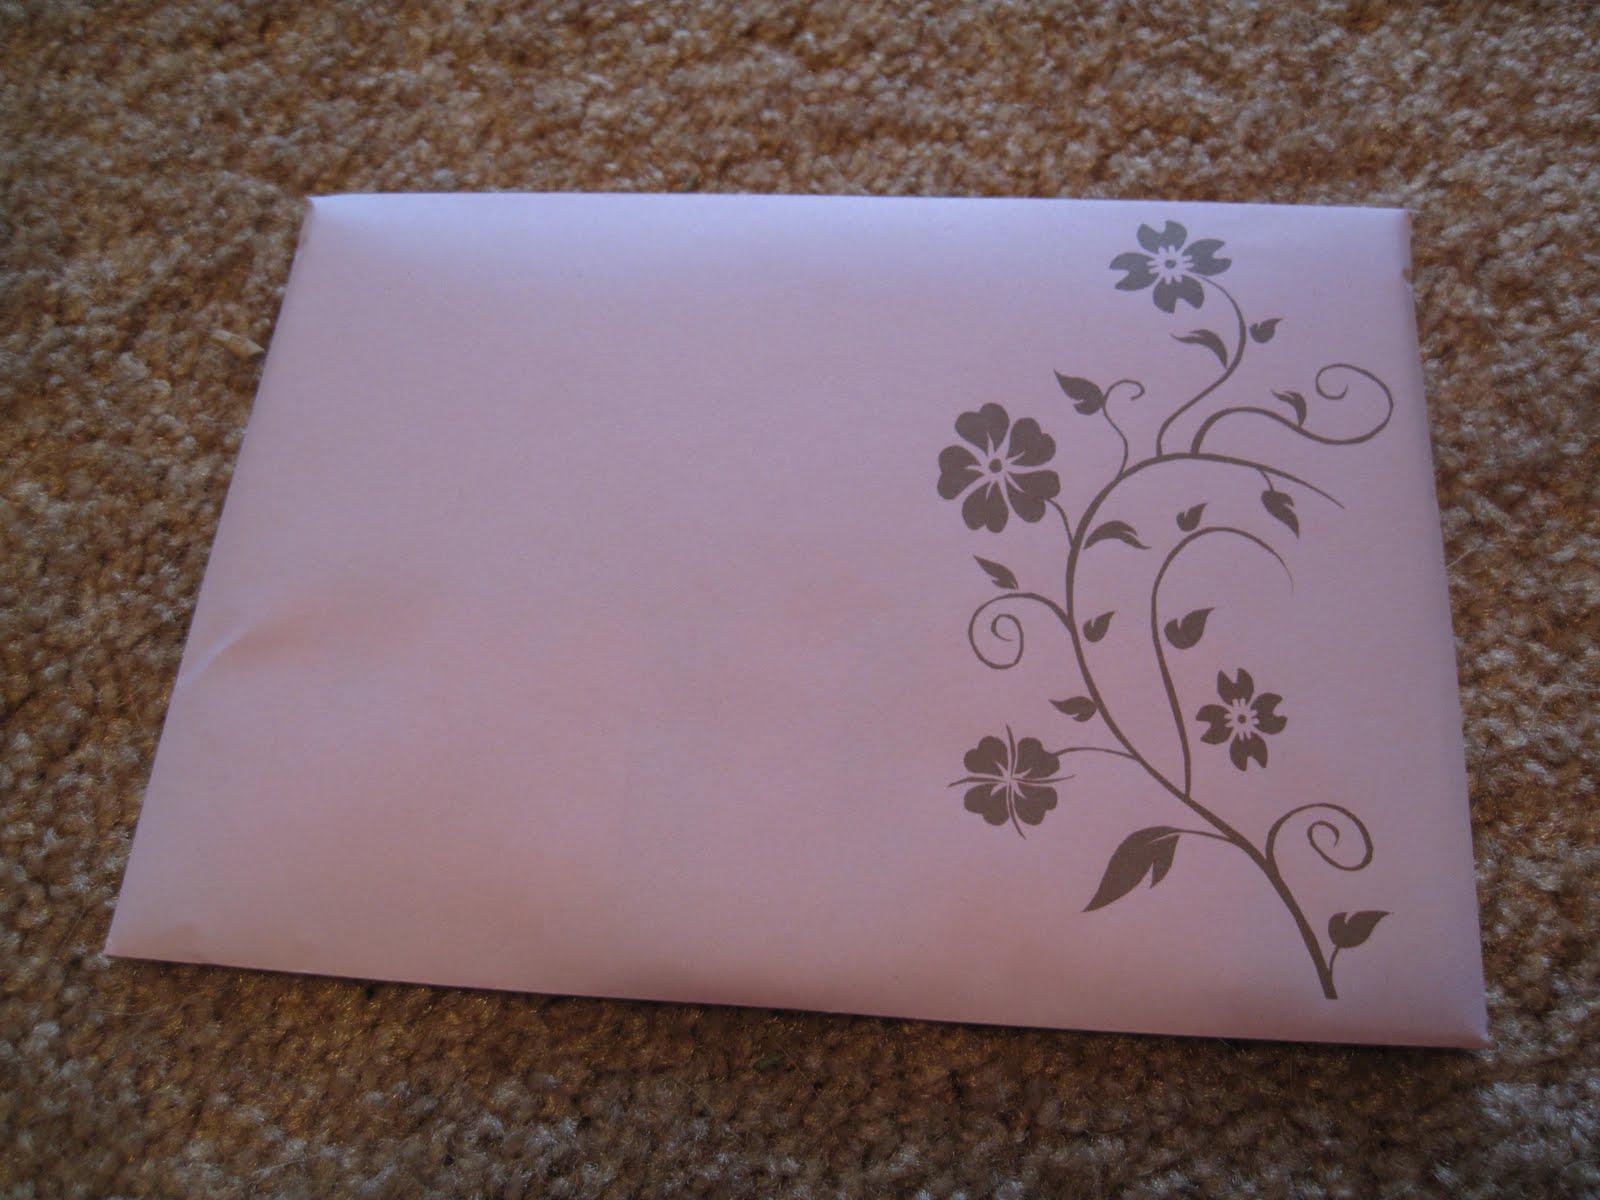    Ohhh, what a pretty envelope!